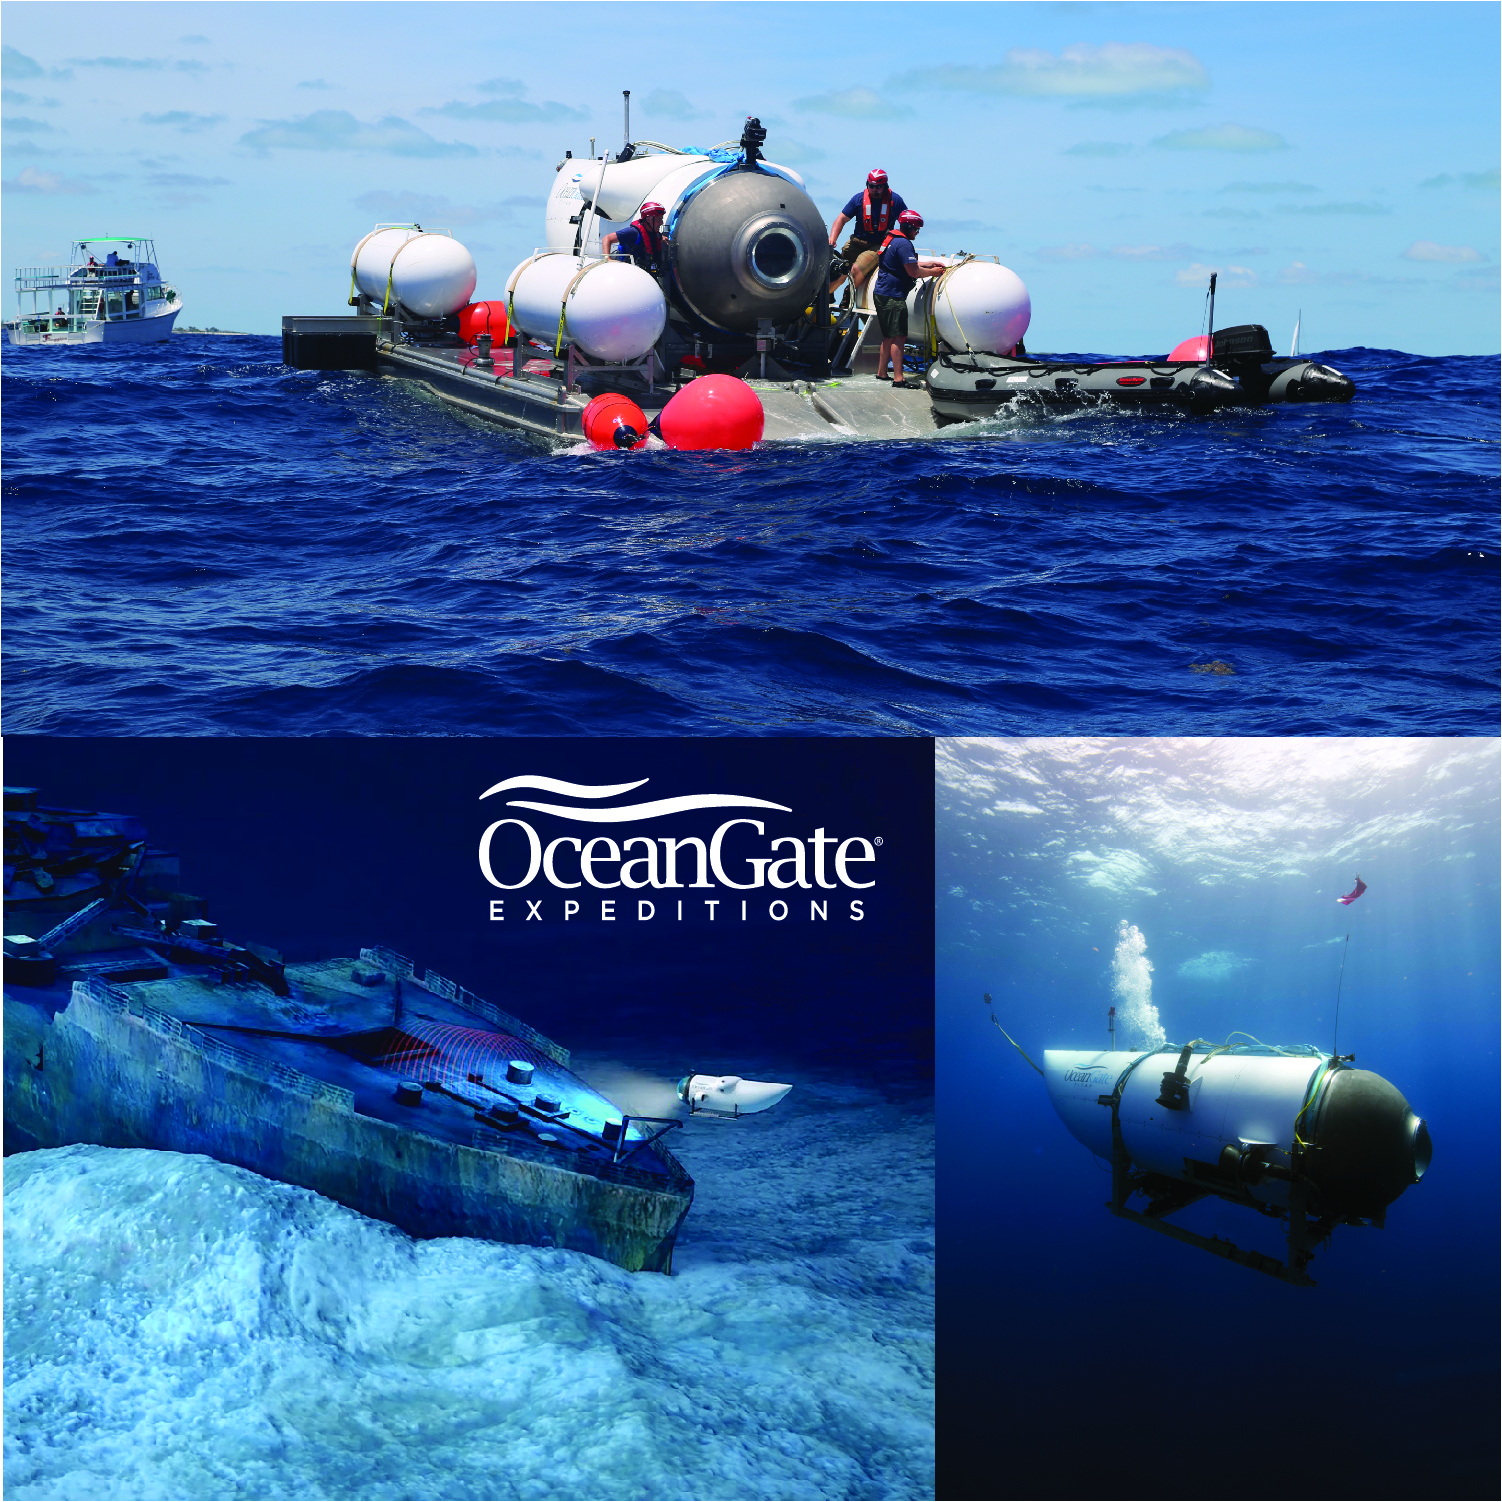 OceanGate Expeditions Titanic Survey Expedition 2021 Titan Submersible